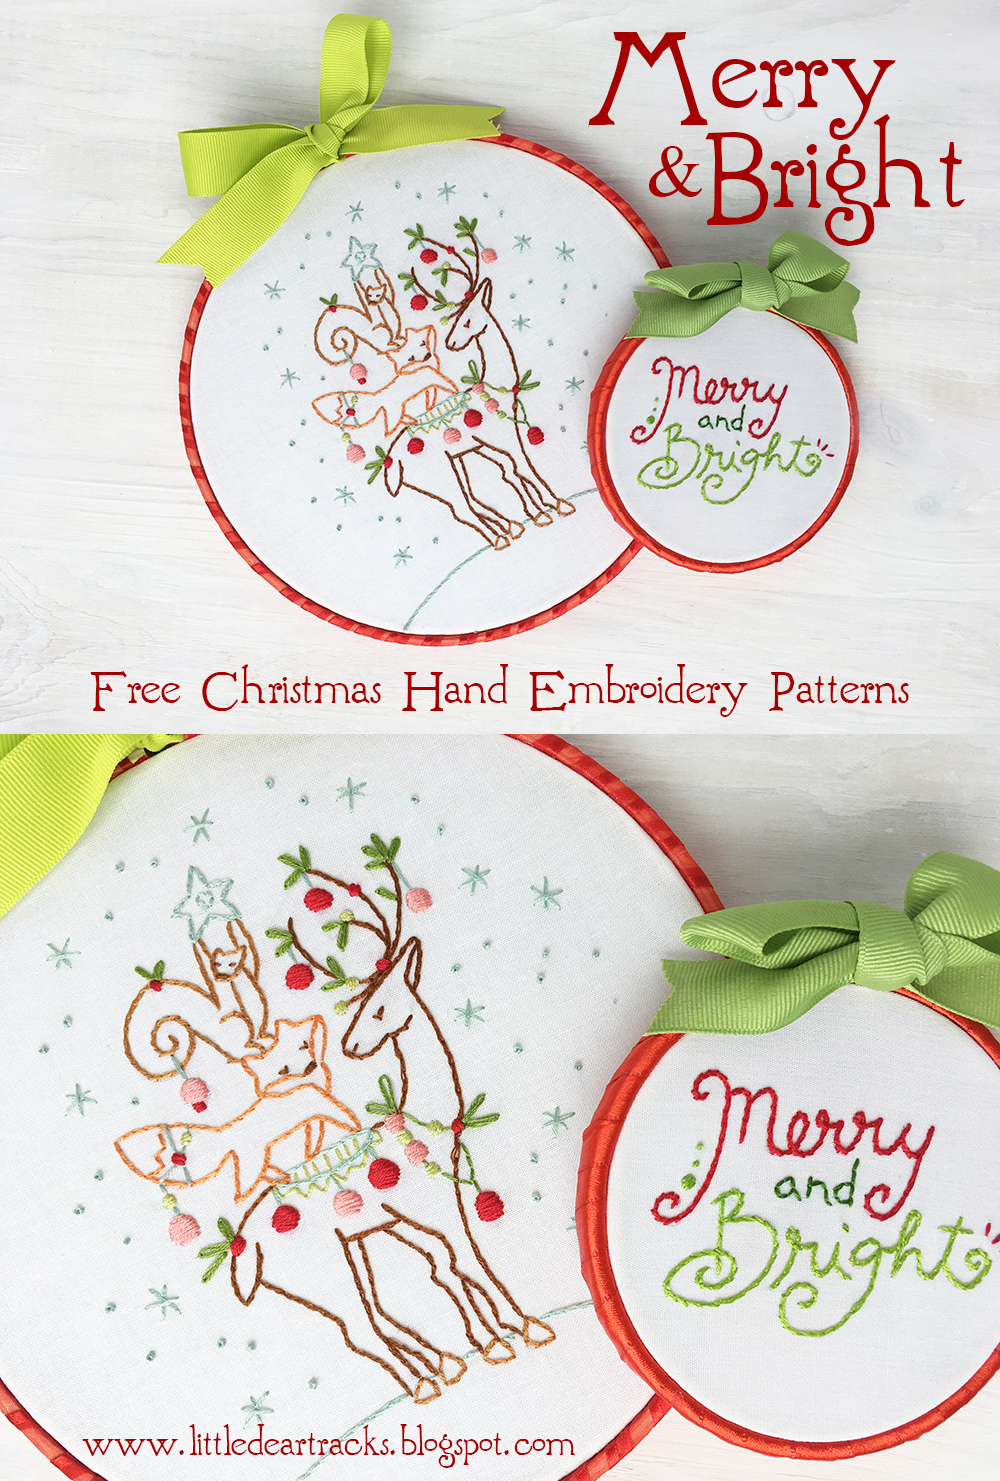 Christmas Hand Embroidery Patterns Little Dear Tracks Free Christmas Embroidery Patterns